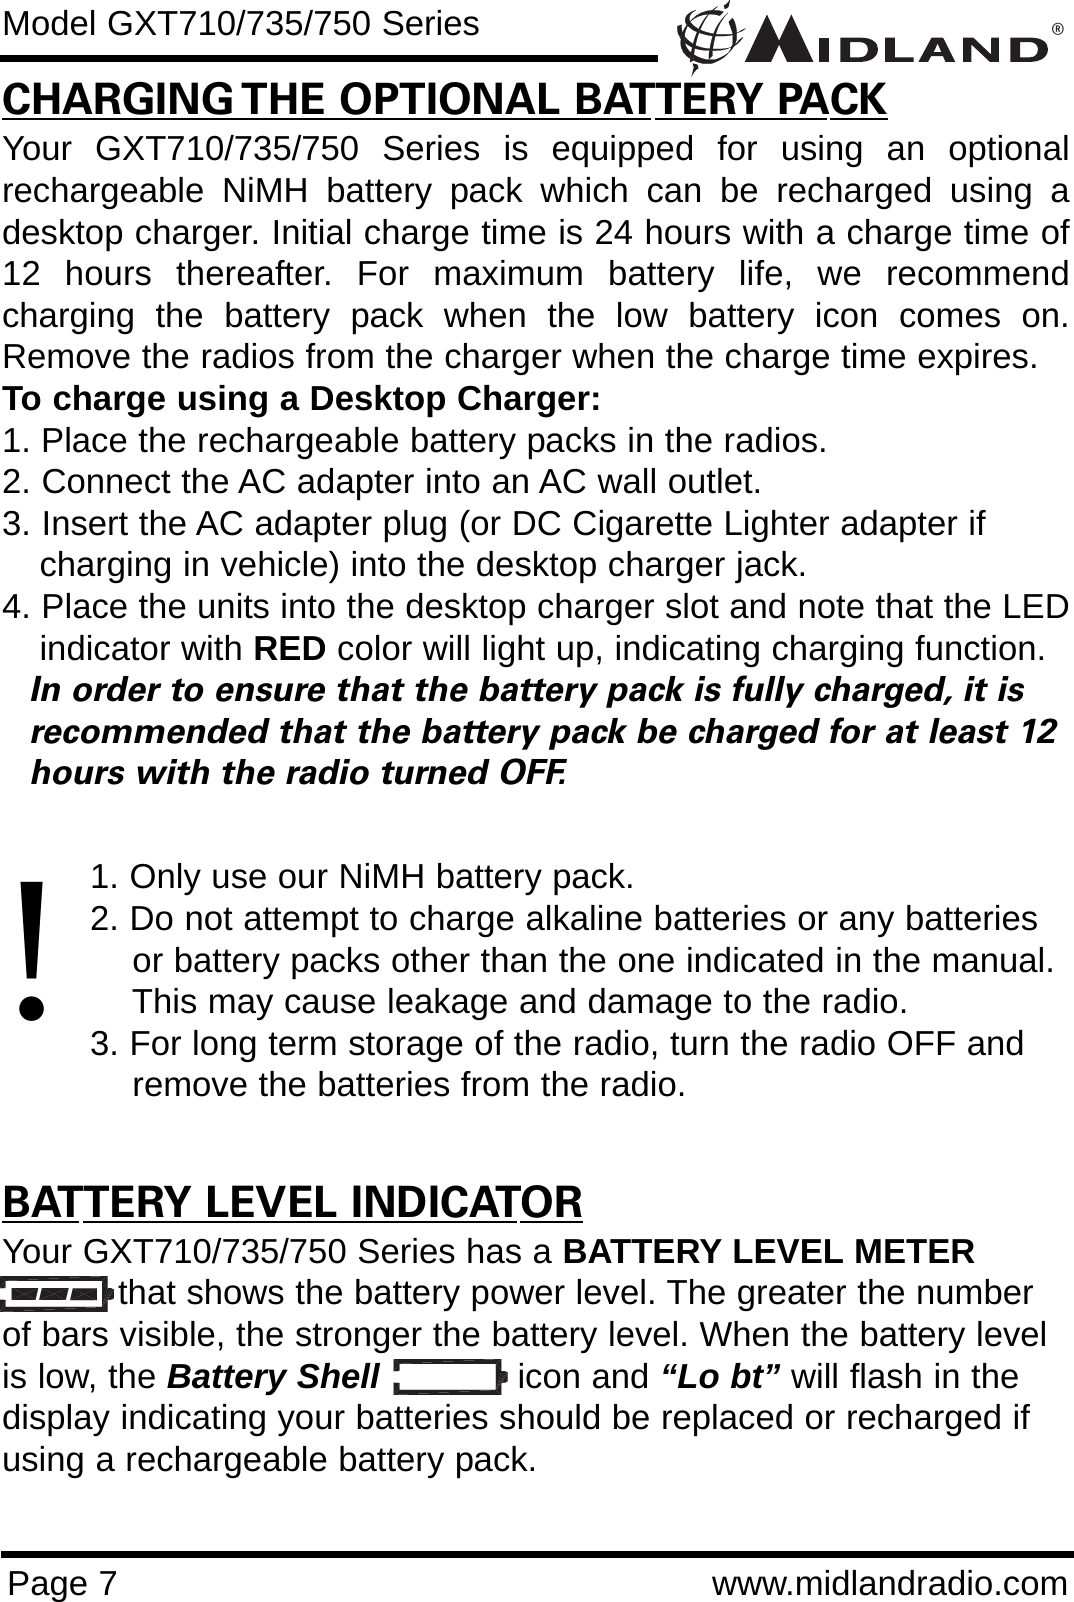 ®Page 7 www.midlandradio.comCHARGING THE OPTIONAL BATTERY PACKYour GXT710/735/750 Series is equipped for using an optionalrechargeable NiMH battery pack which can be recharged using adesktop charger. Initial charge time is 24 hours with a charge time of12 hours thereafter. For maximum battery life, we recommendcharging the battery pack when the low battery icon comes on.Remove the radios from the charger when the charge time expires.To charge using a Desktop Charger:1. Place the rechargeable battery packs in the radios.2. Connect the AC adapter into an AC wall outlet.3. Insert the AC adapter plug (or DC Cigarette Lighter adapter if    charging in vehicle) into the desktop charger jack.4. Place the units into the desktop charger slot and note that the LEDindicator with RED color will light up, indicating charging function. In order to ensure that the battery pack is fully charged, it is  recommended that the battery pack be charged for at least 12 hours with the radio turned OFF.1. Only use our NiMH battery pack.2. Do not attempt to charge alkaline batteries or any batteries or battery packs other than the one indicated in the manual. This may cause leakage and damage to the radio.3. For long term storage of the radio, turn the radio OFF and remove the batteries from the radio.BATTERY LEVEL INDICATORYour GXT710/735/750 Series has a BATTERY LEVEL METERthat shows the battery power level. The greater the numberof bars visible, the stronger the battery level. When the battery levelis low, the Battery Shell icon and “Lo bt” will flash in thedisplay indicating your batteries should be replaced or recharged ifusing a rechargeable battery pack.Model GXT710/735/750 Series!